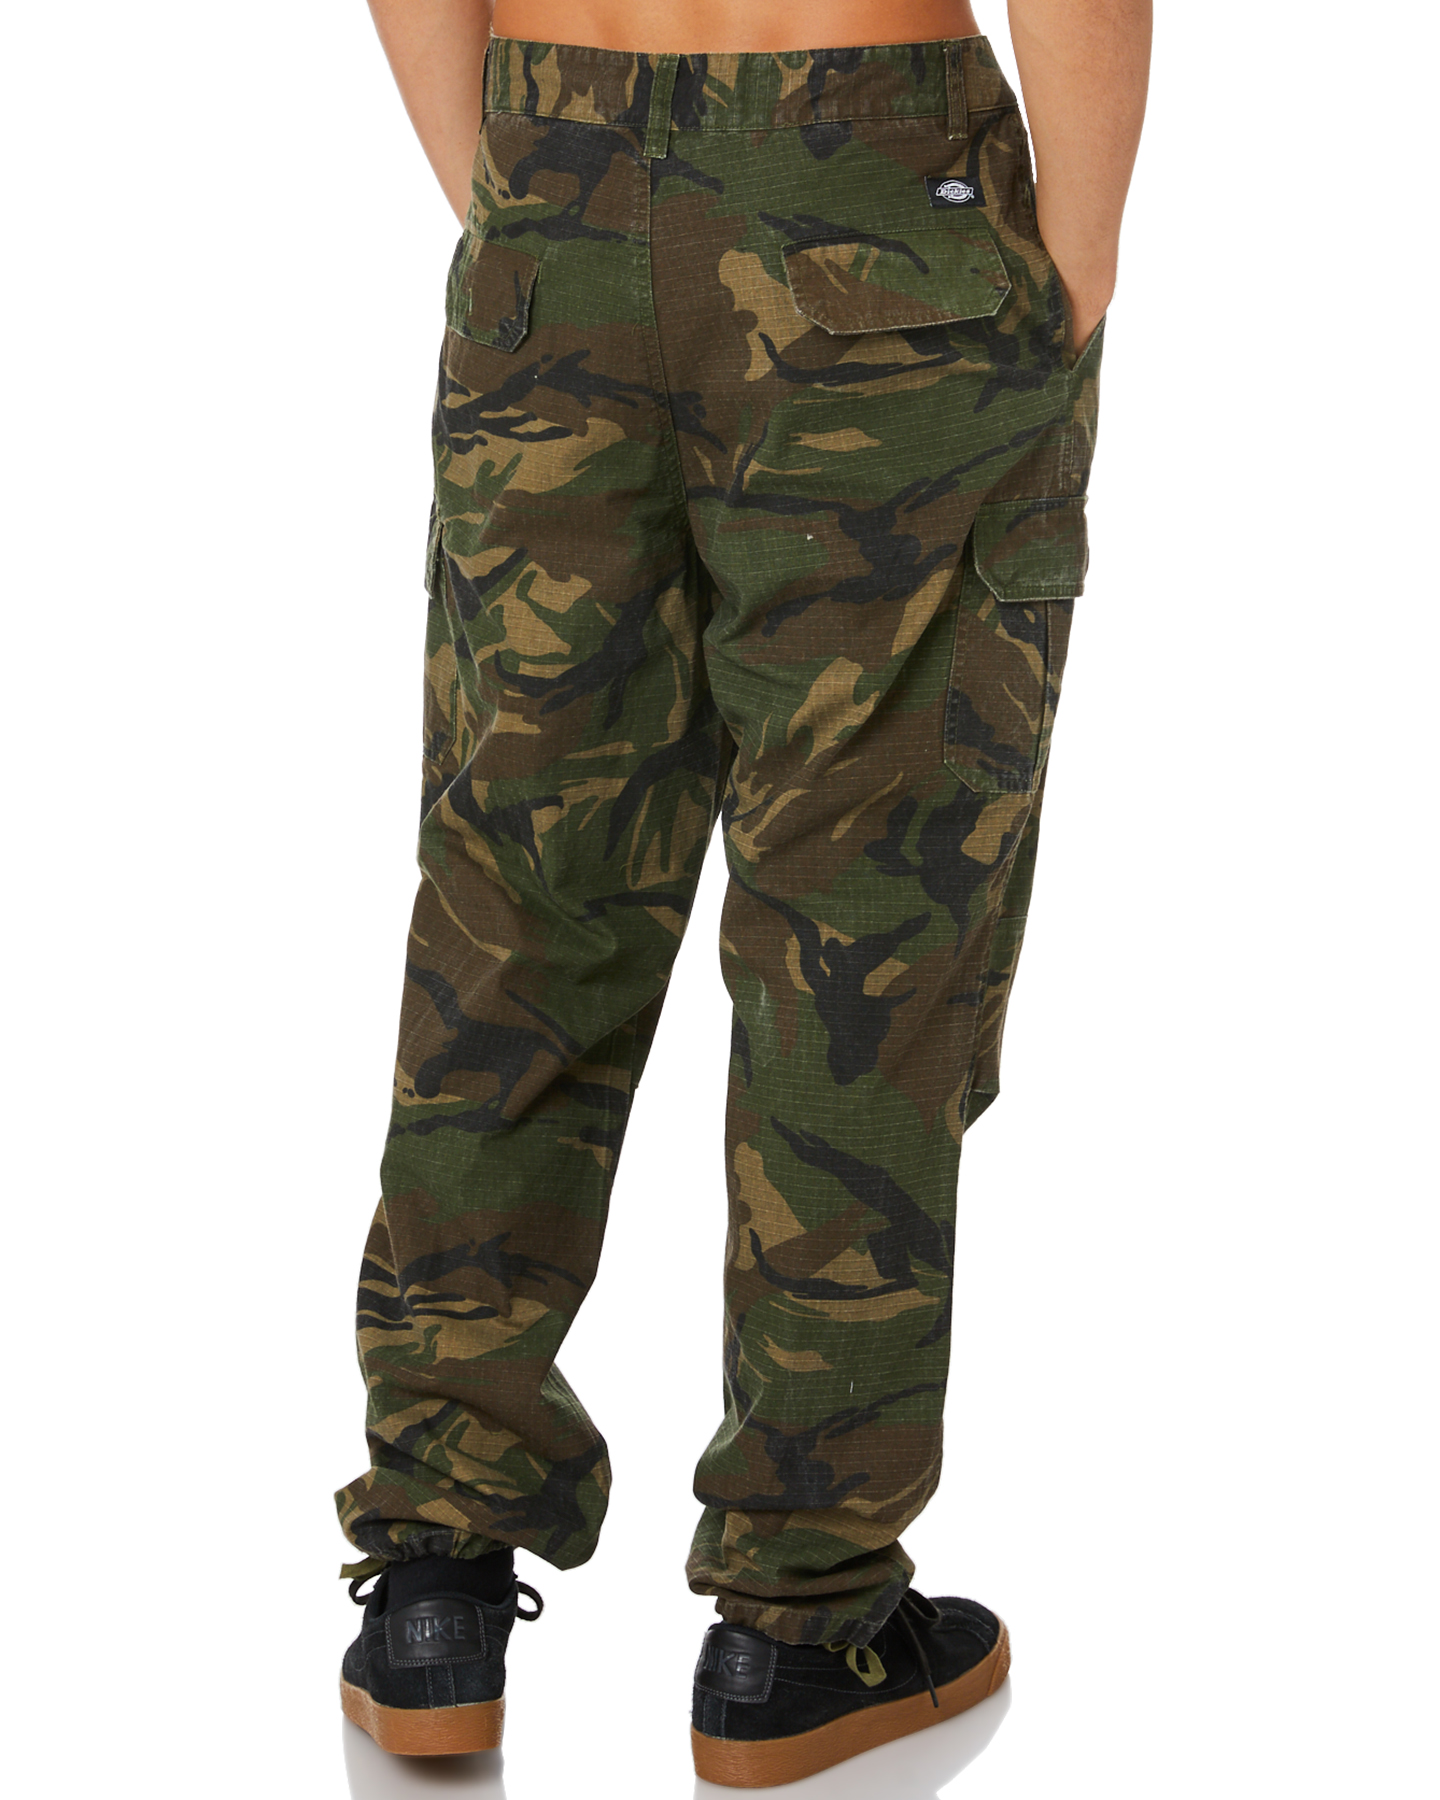 Dickies Sierra Relaxed Fit Cargo Pants - Camo | SurfStitch